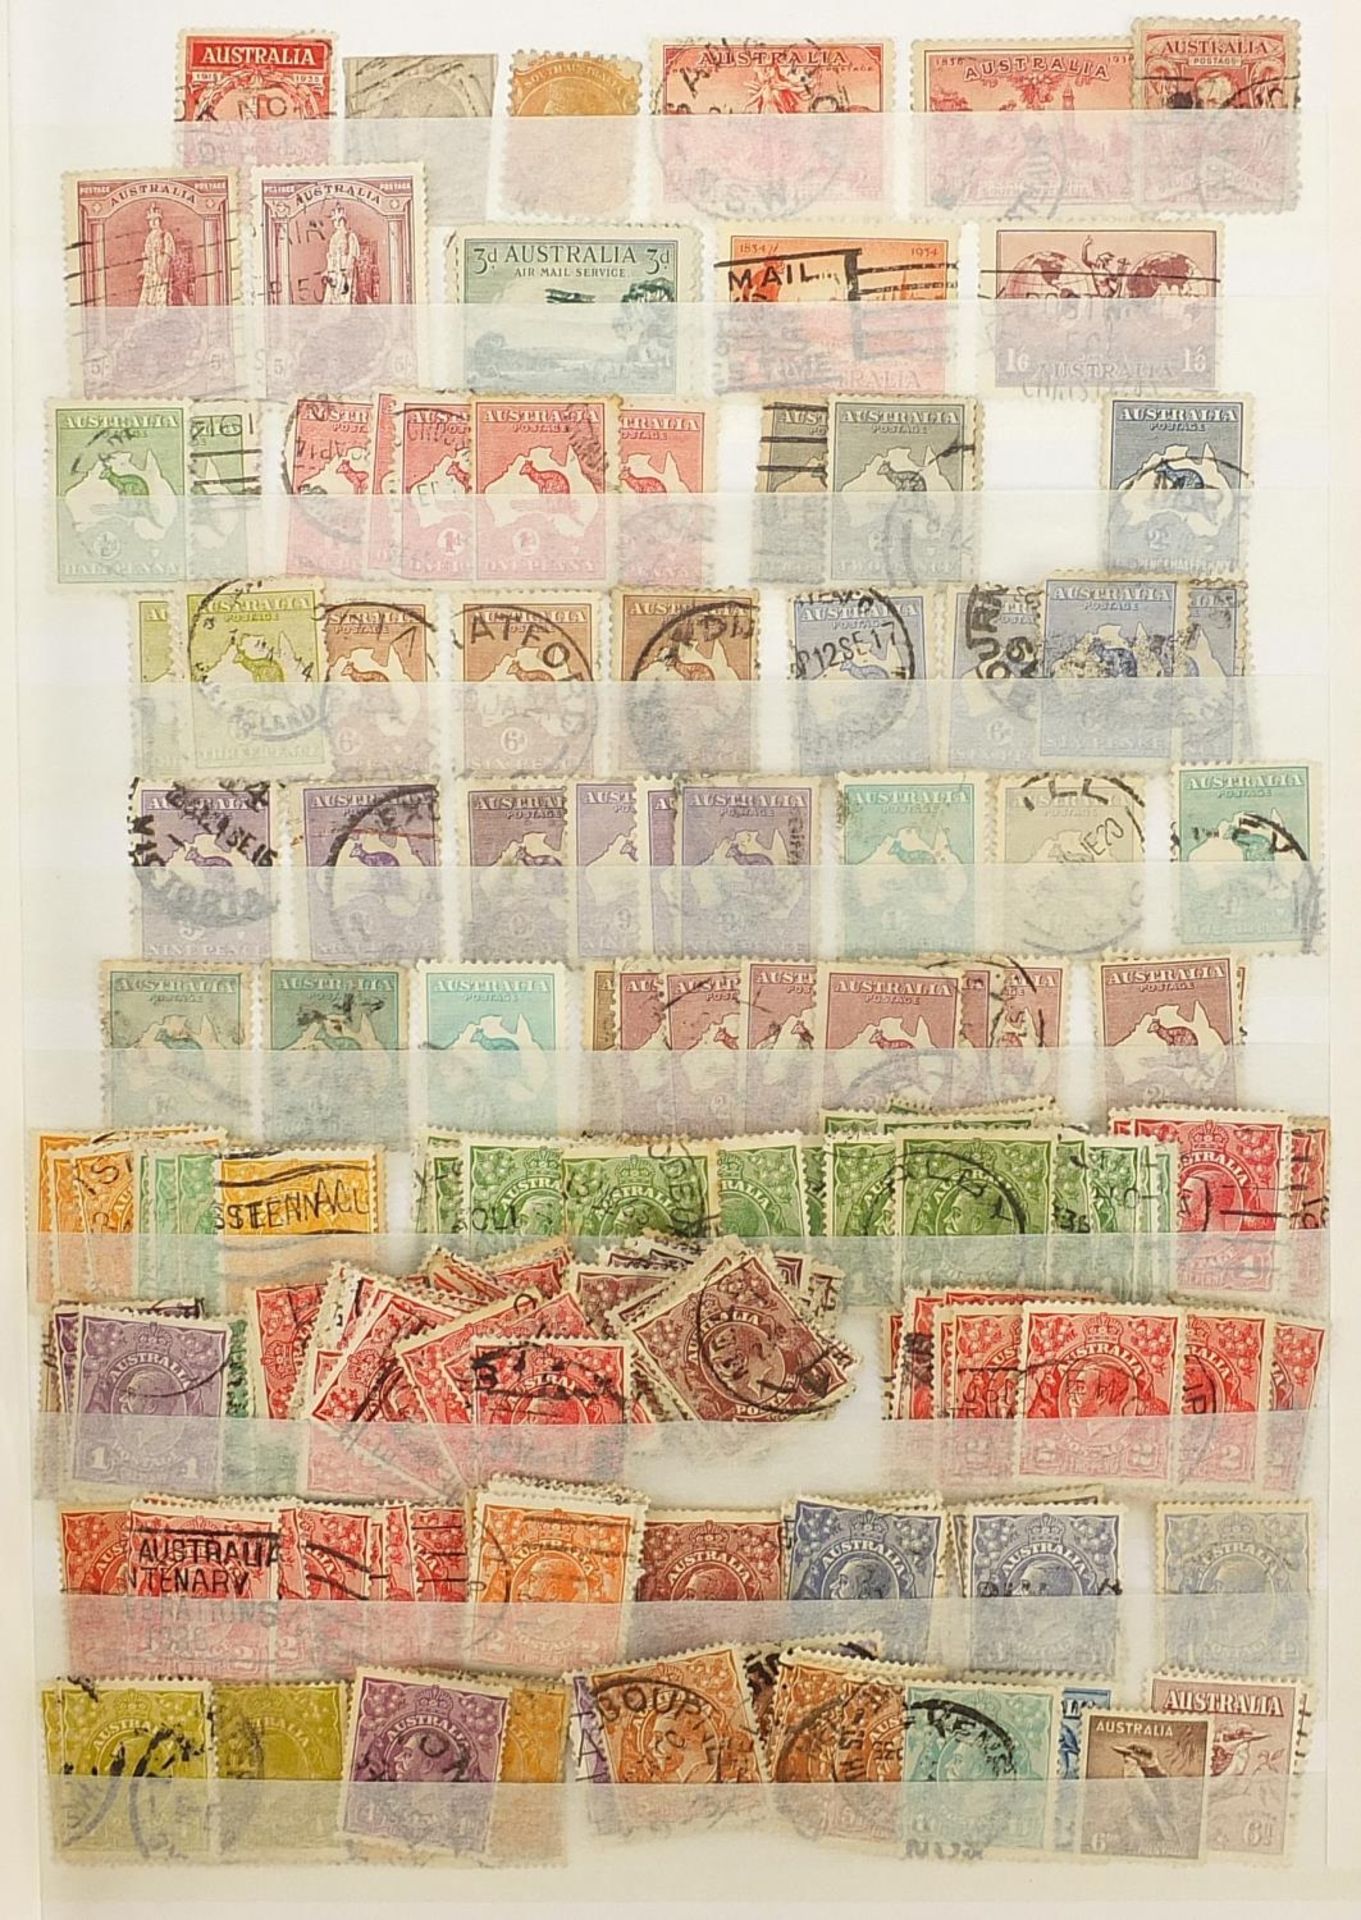 Collection of Australian stamps arranged in an album including early Victorian single state issues